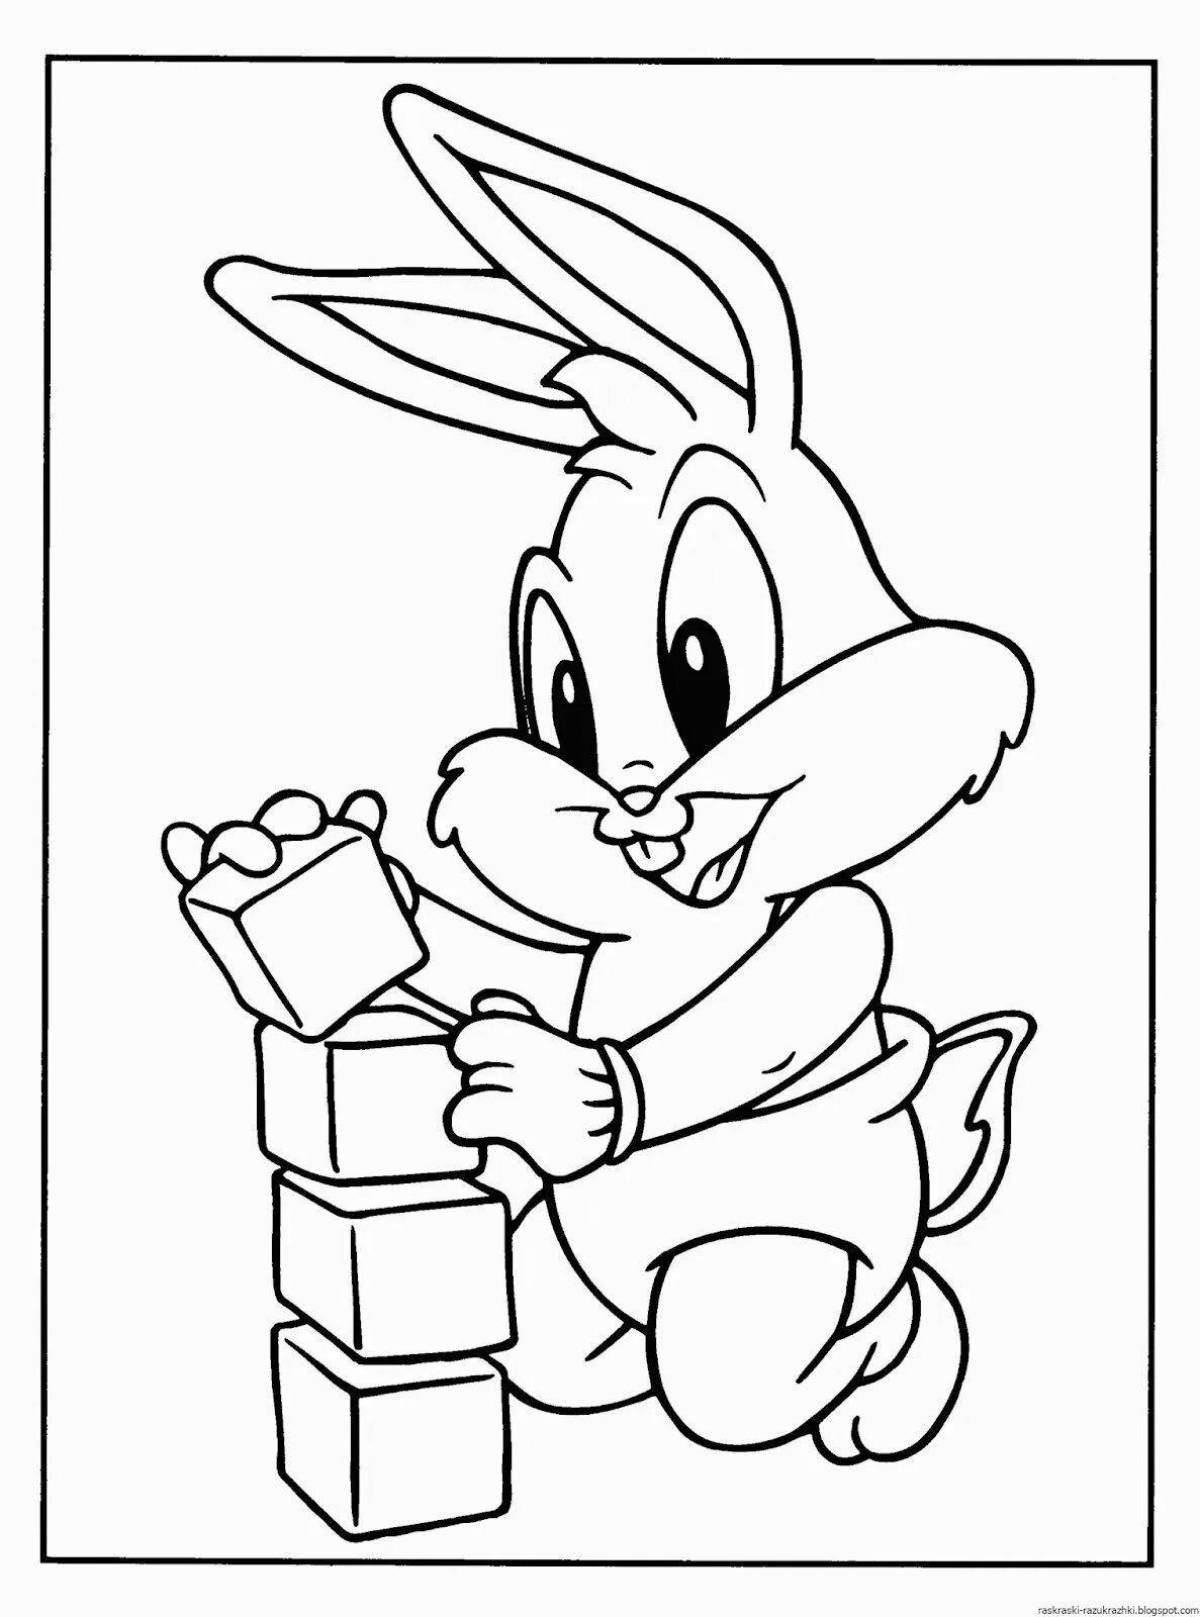 Incredible cartoon characters coloring book for 4-5 year olds